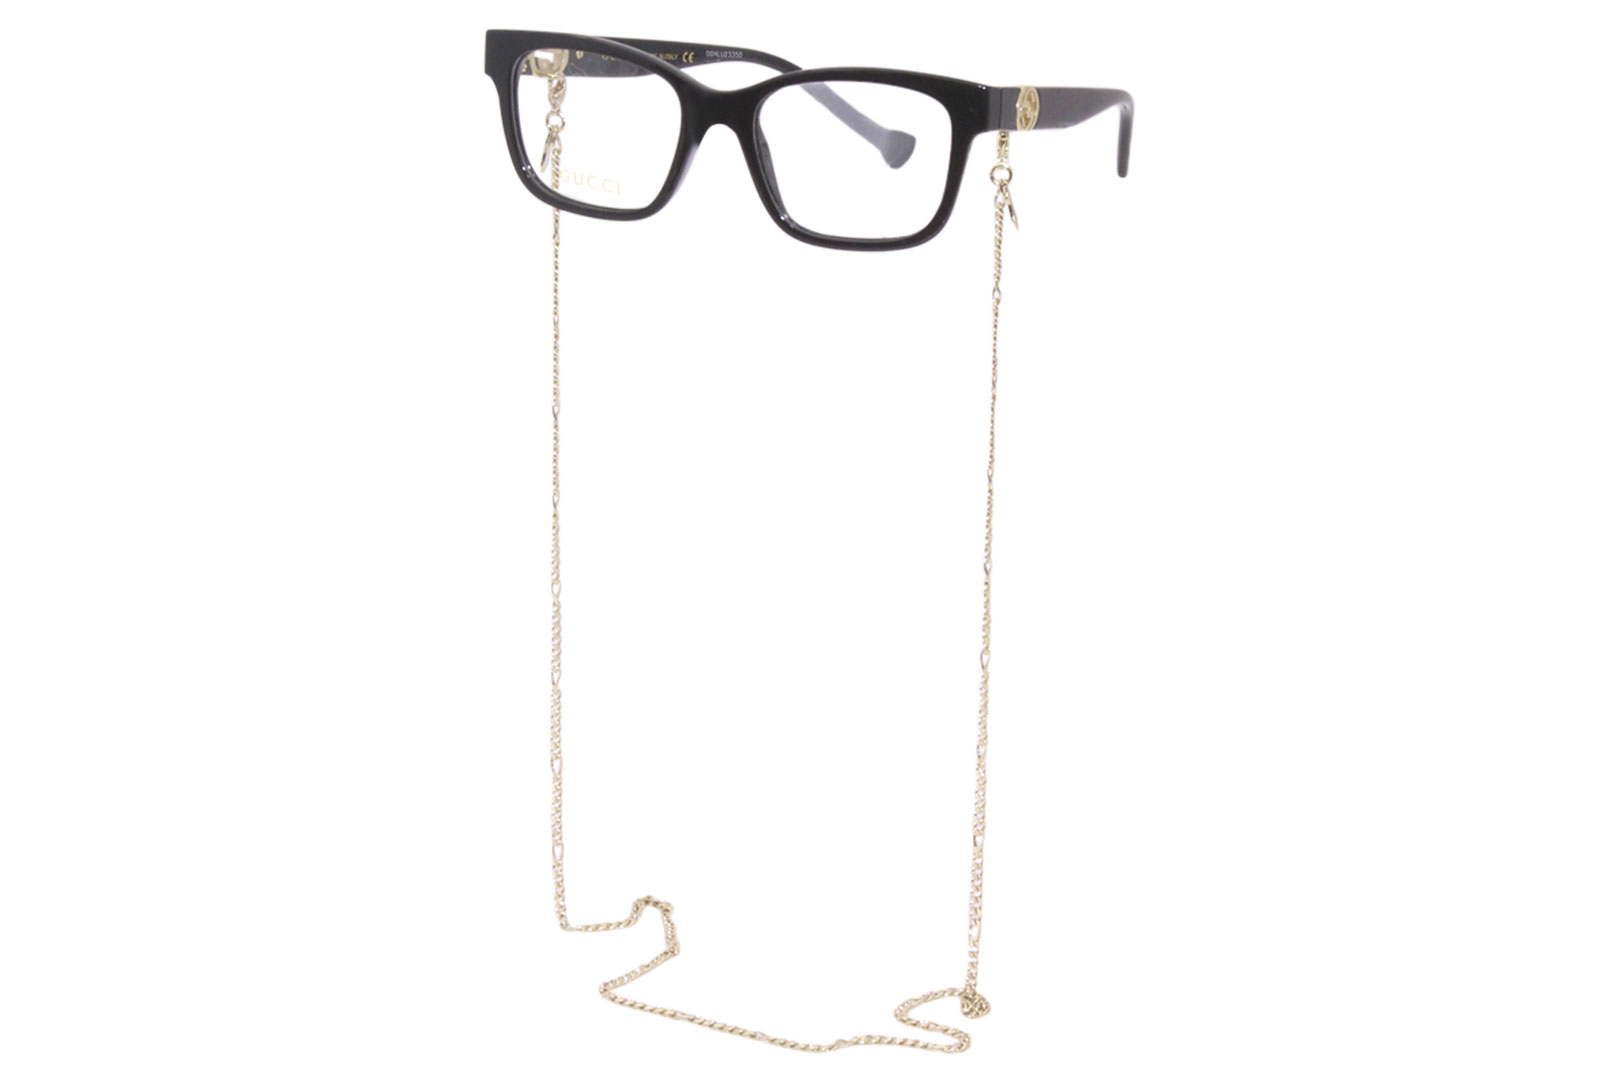 Gucci Eyeglasses Frame Women's GG1025O 003 Black/Gold Chain Necklace  51-18-140 